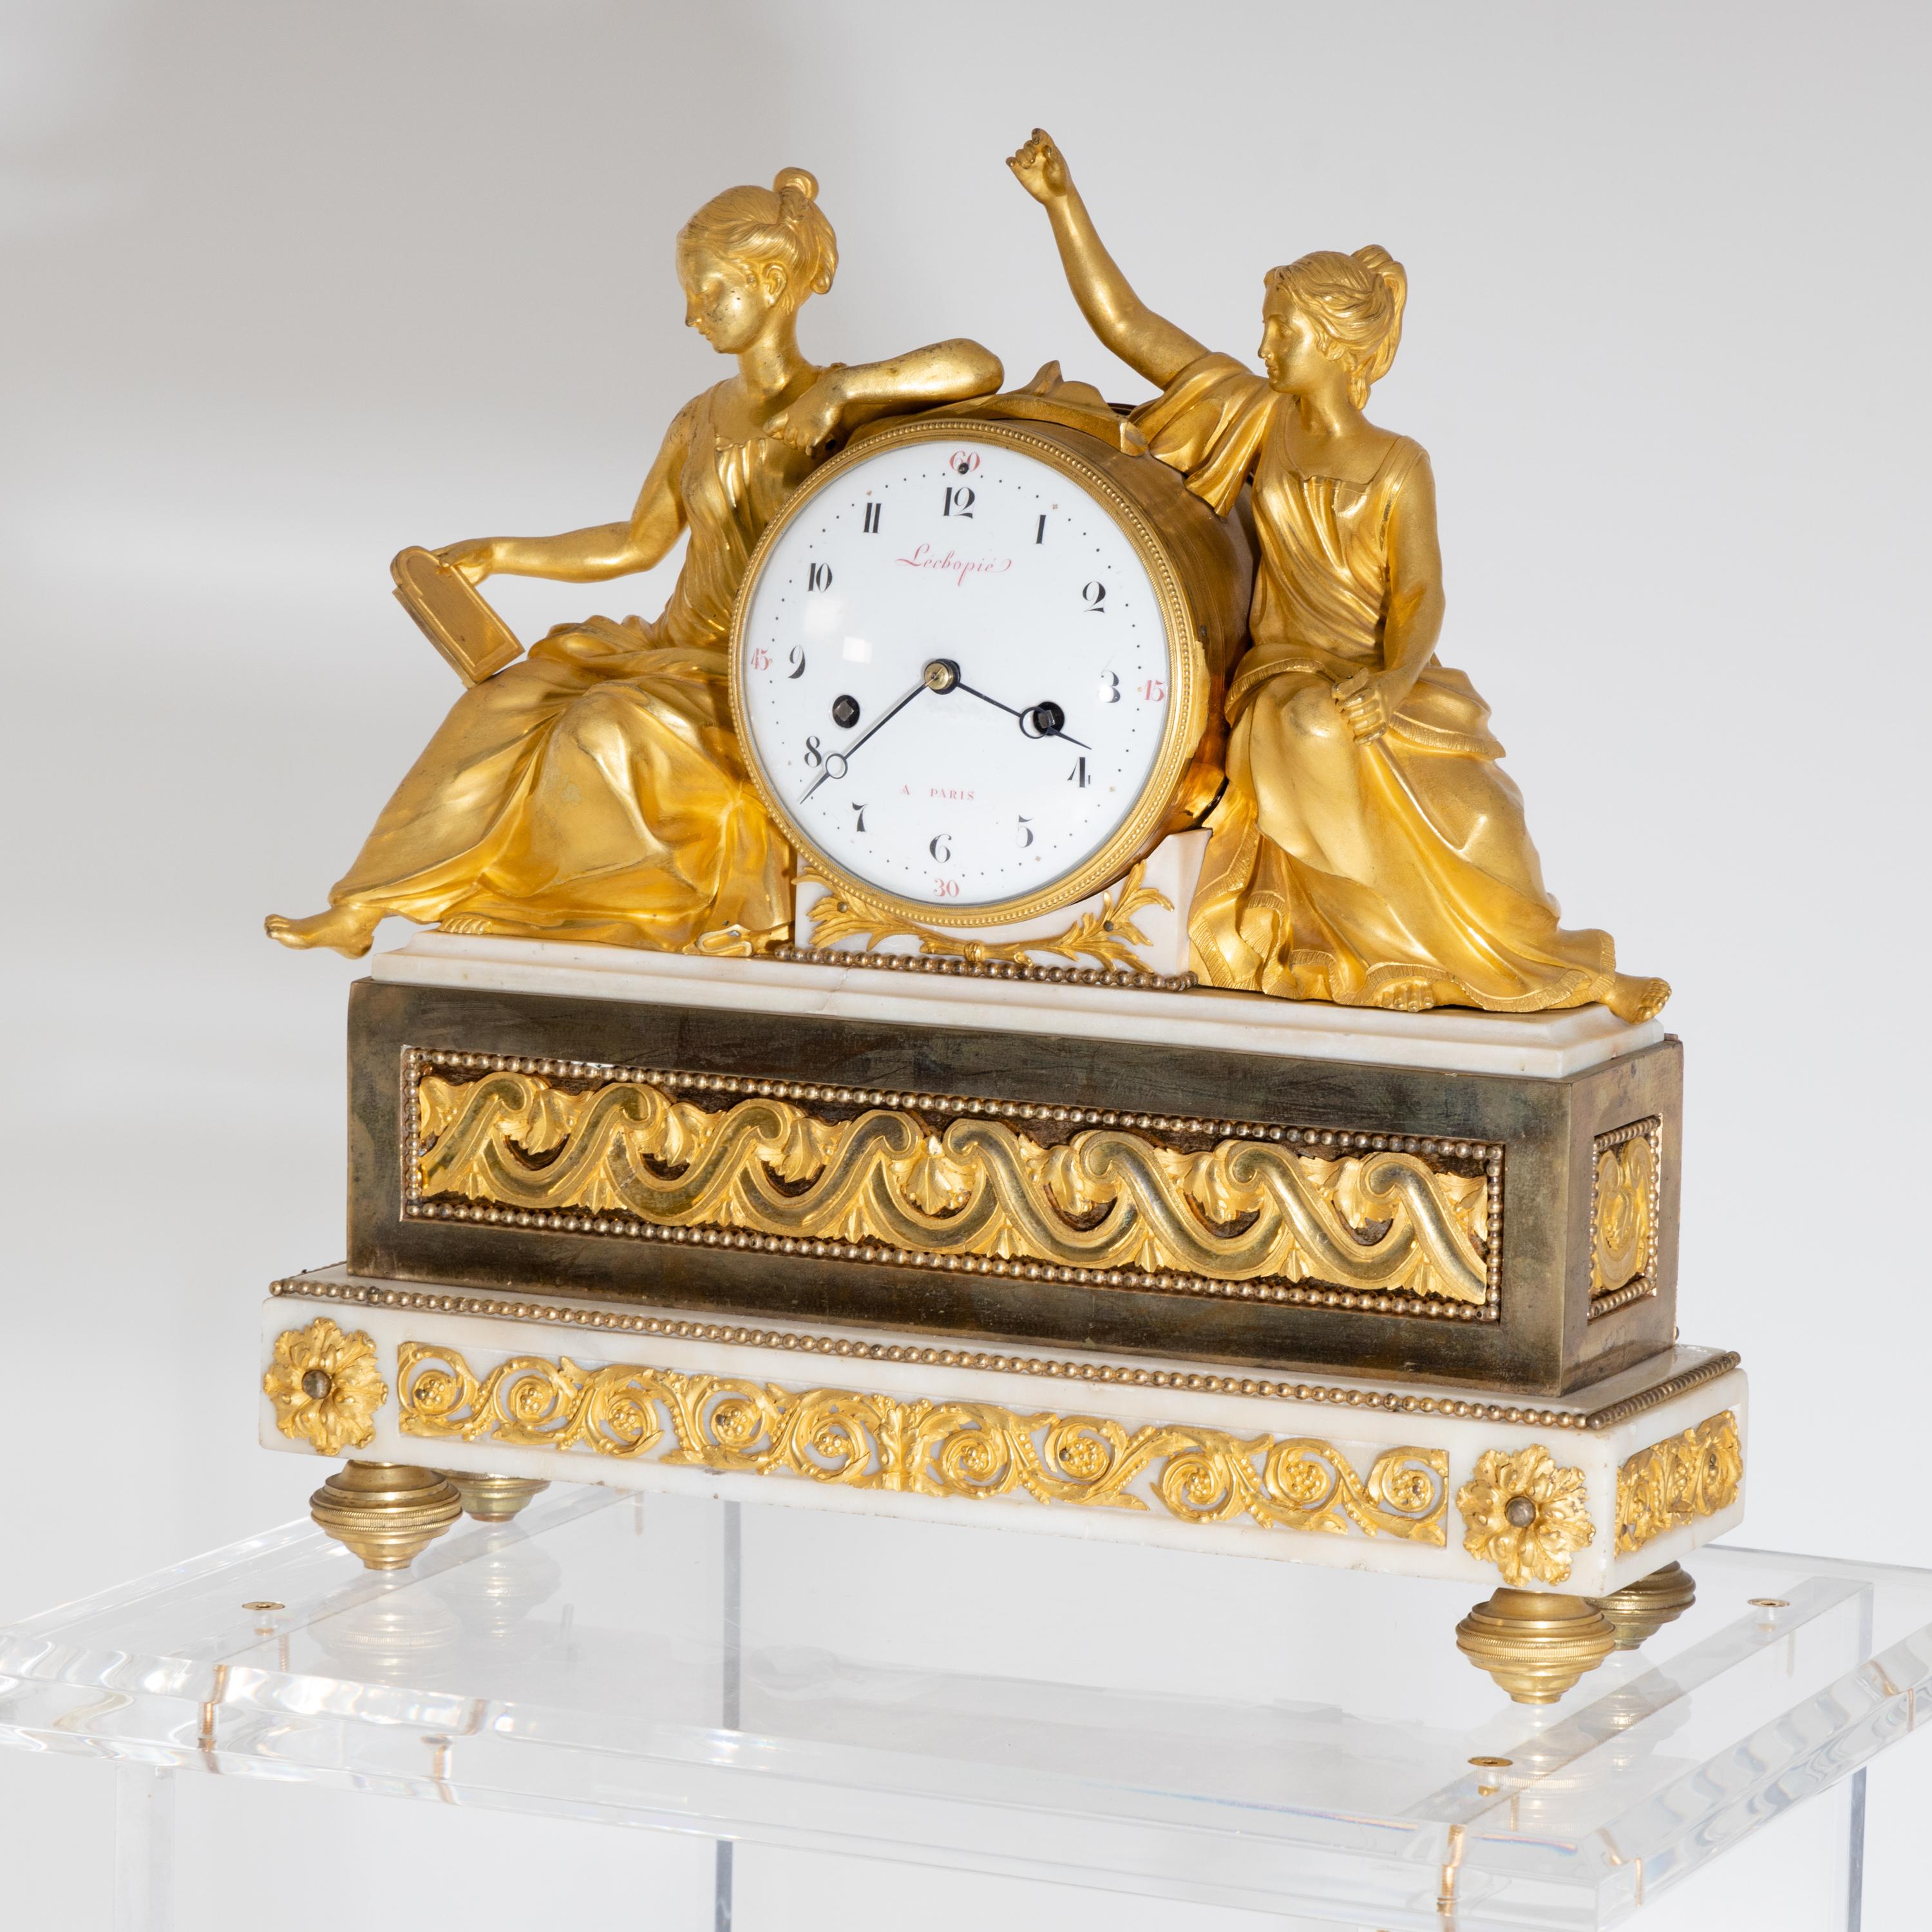 Pendule Clock “Studying the Tablets of the Law”, France, Paris, circa 1770-1780 6